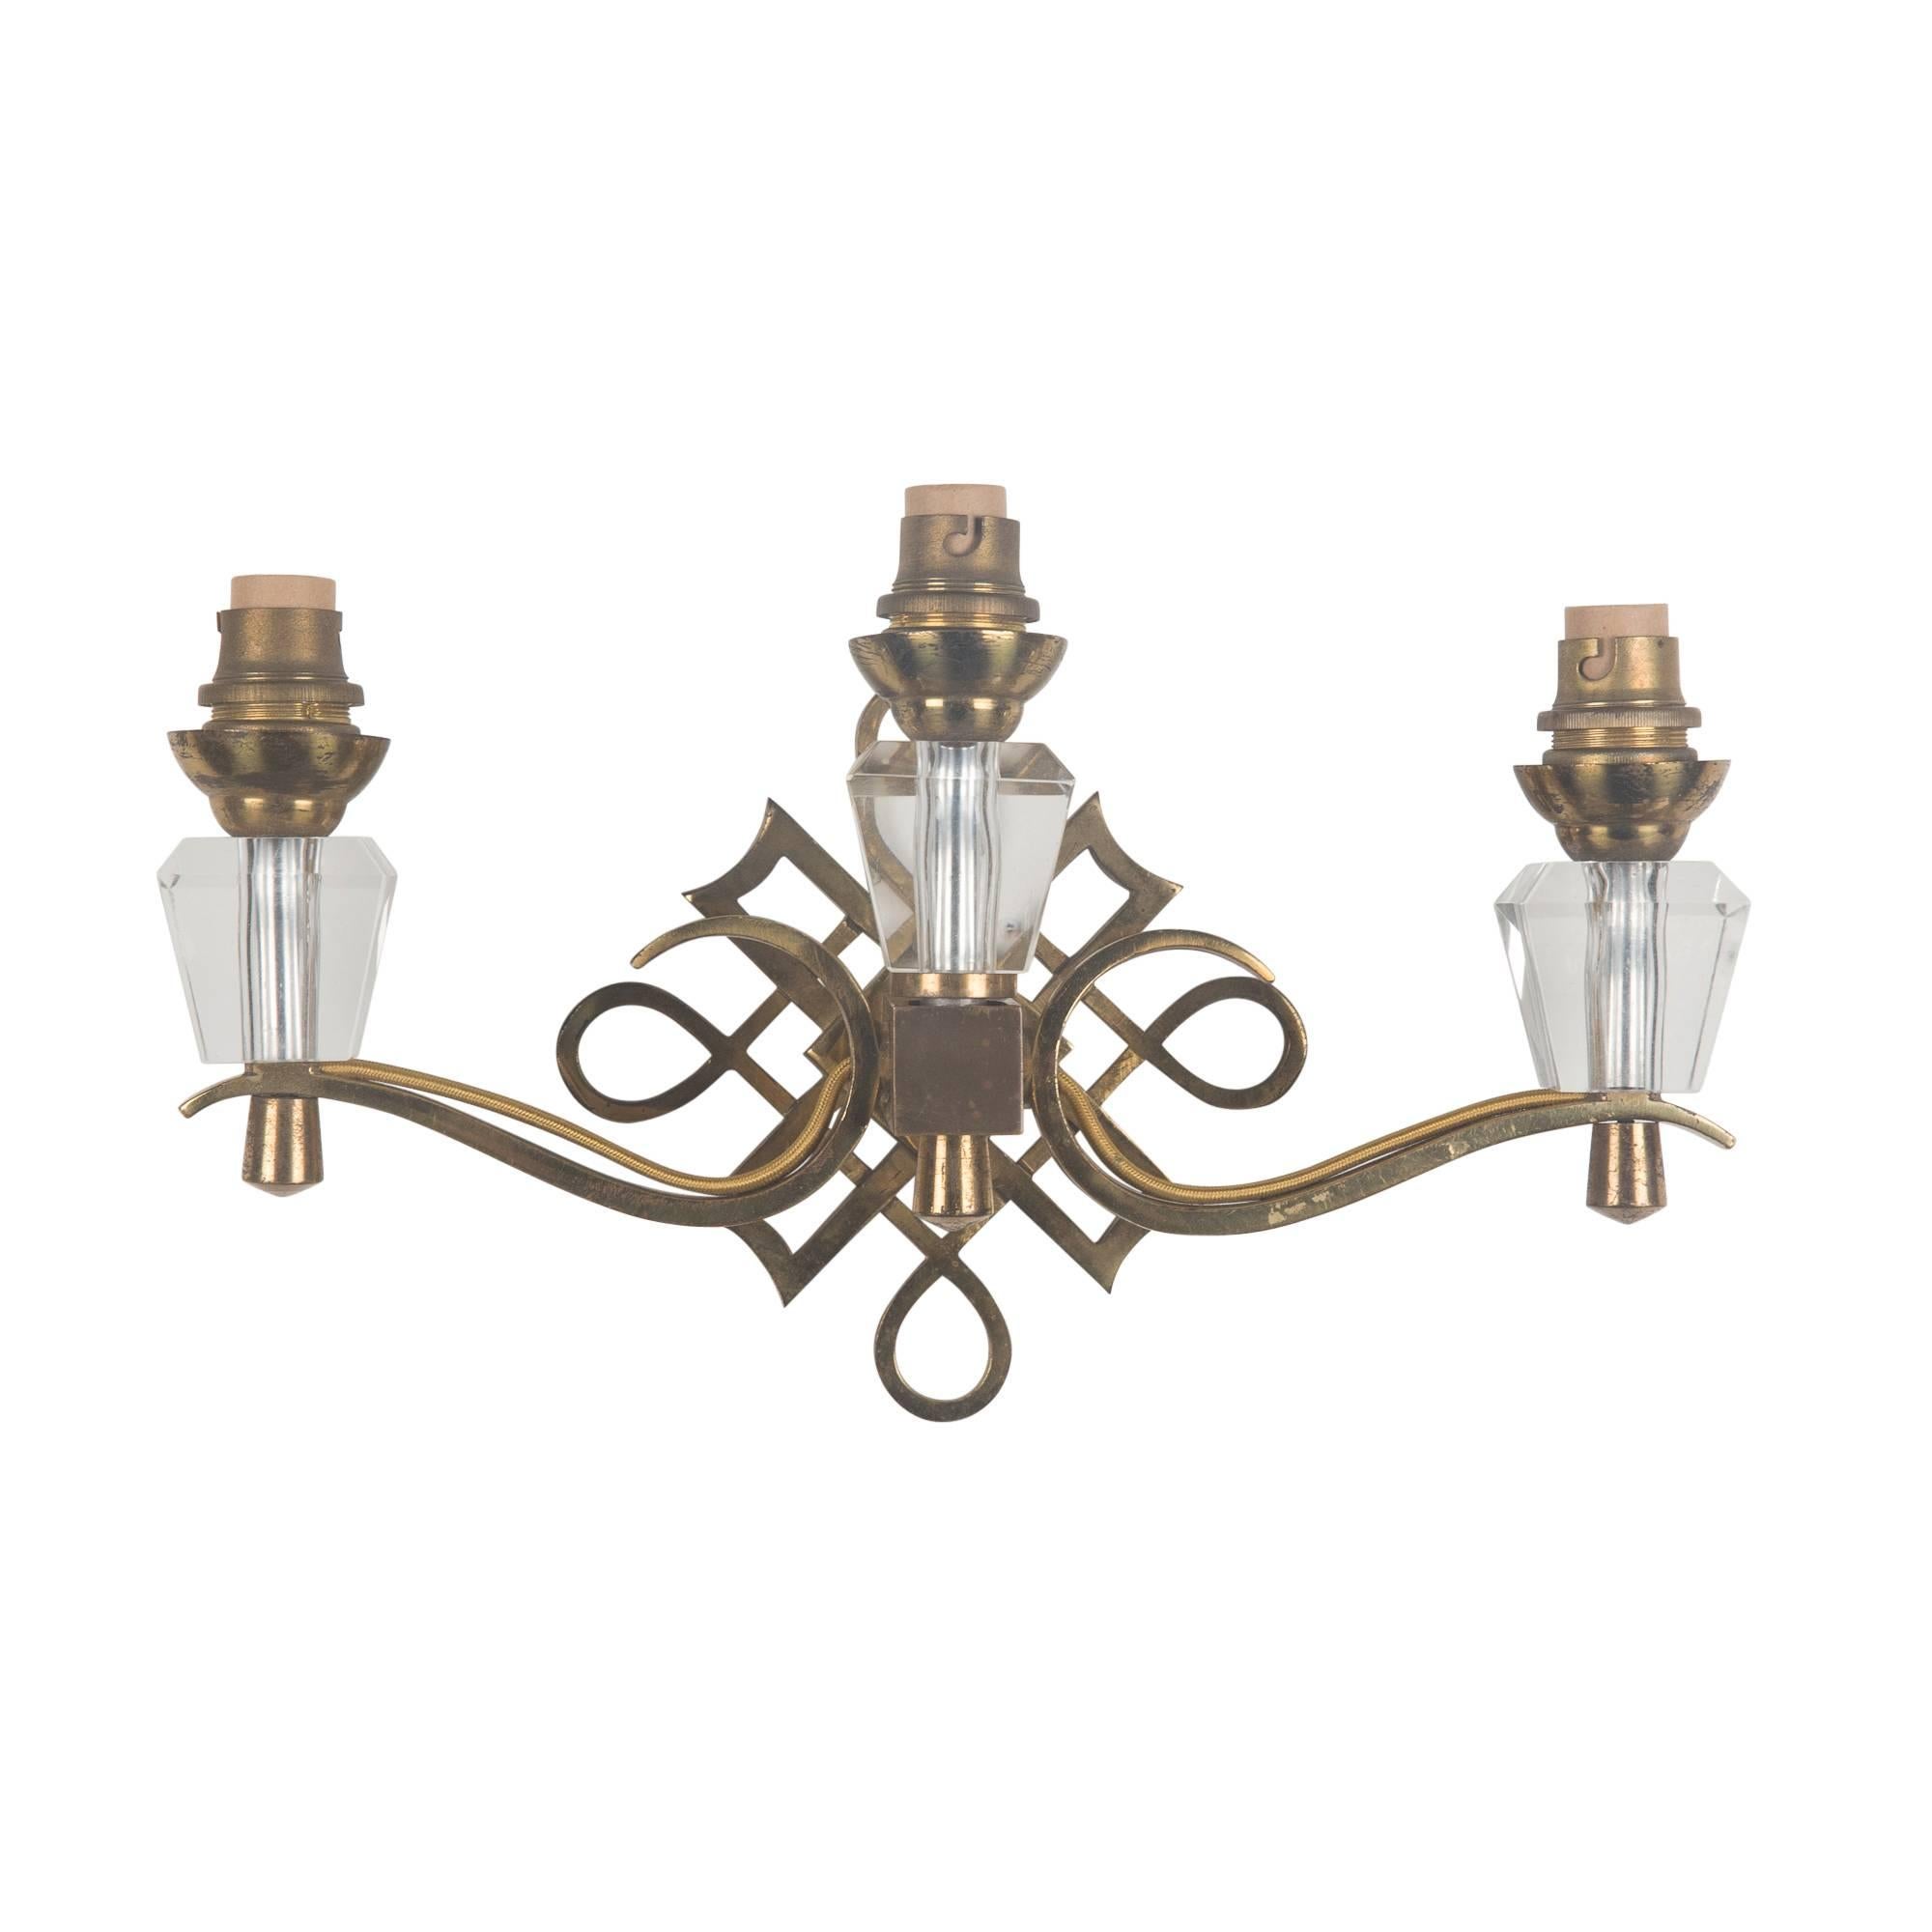 Art Deco Jules Leleu Style Three Light Wall Sconces, French, 1930s For Sale